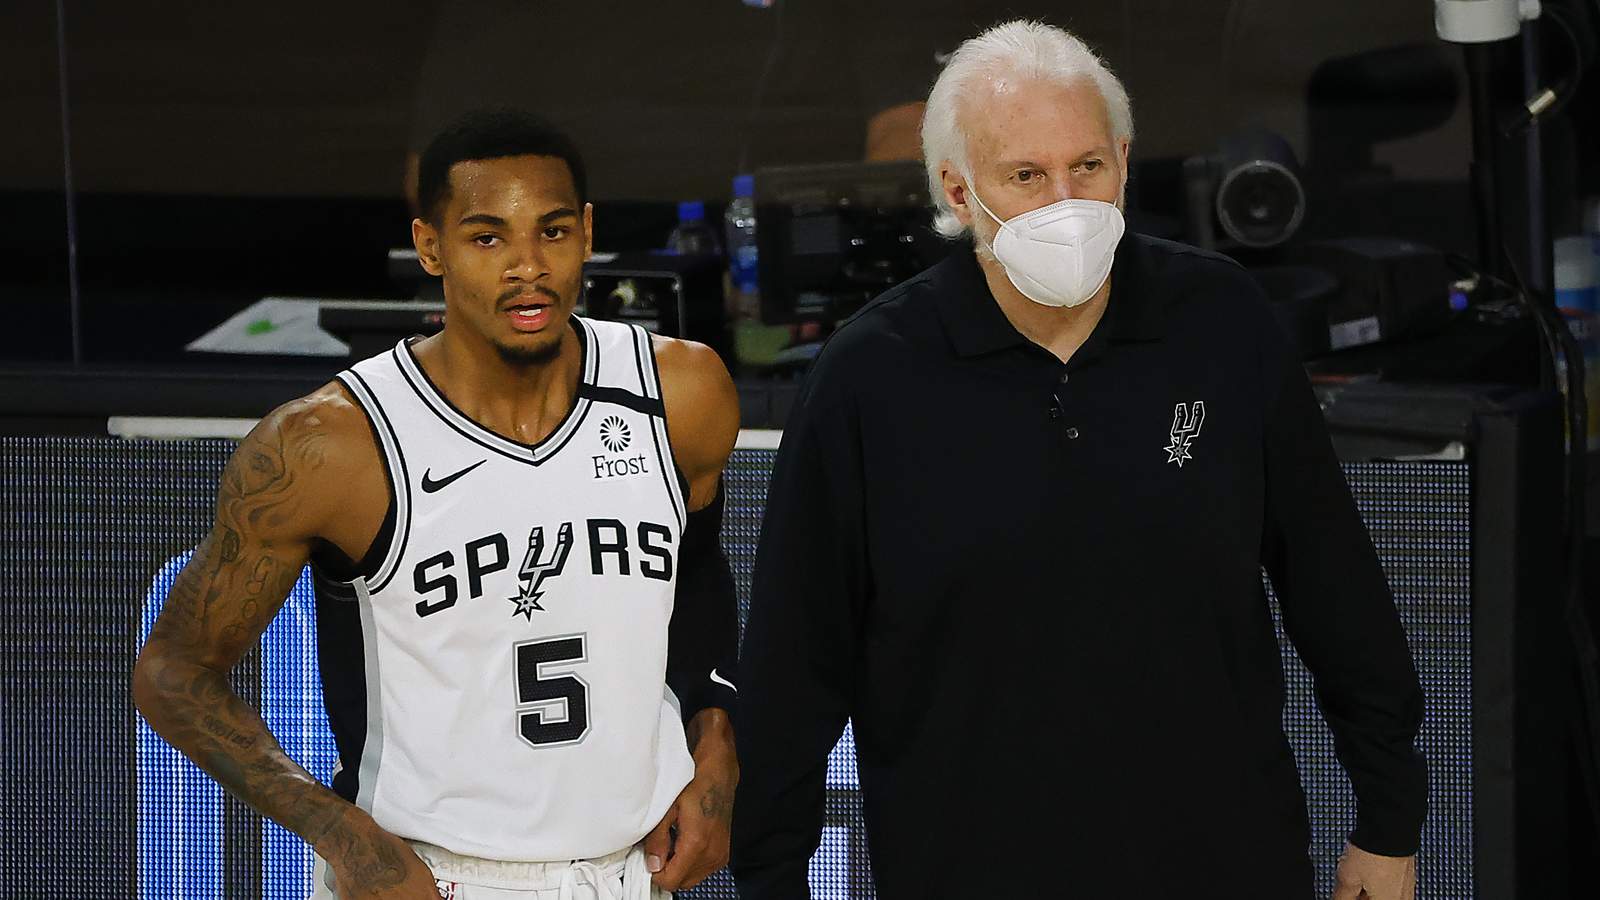 Popovich says no positive COVID cases to start practice, but pair of key Spurs players could miss time